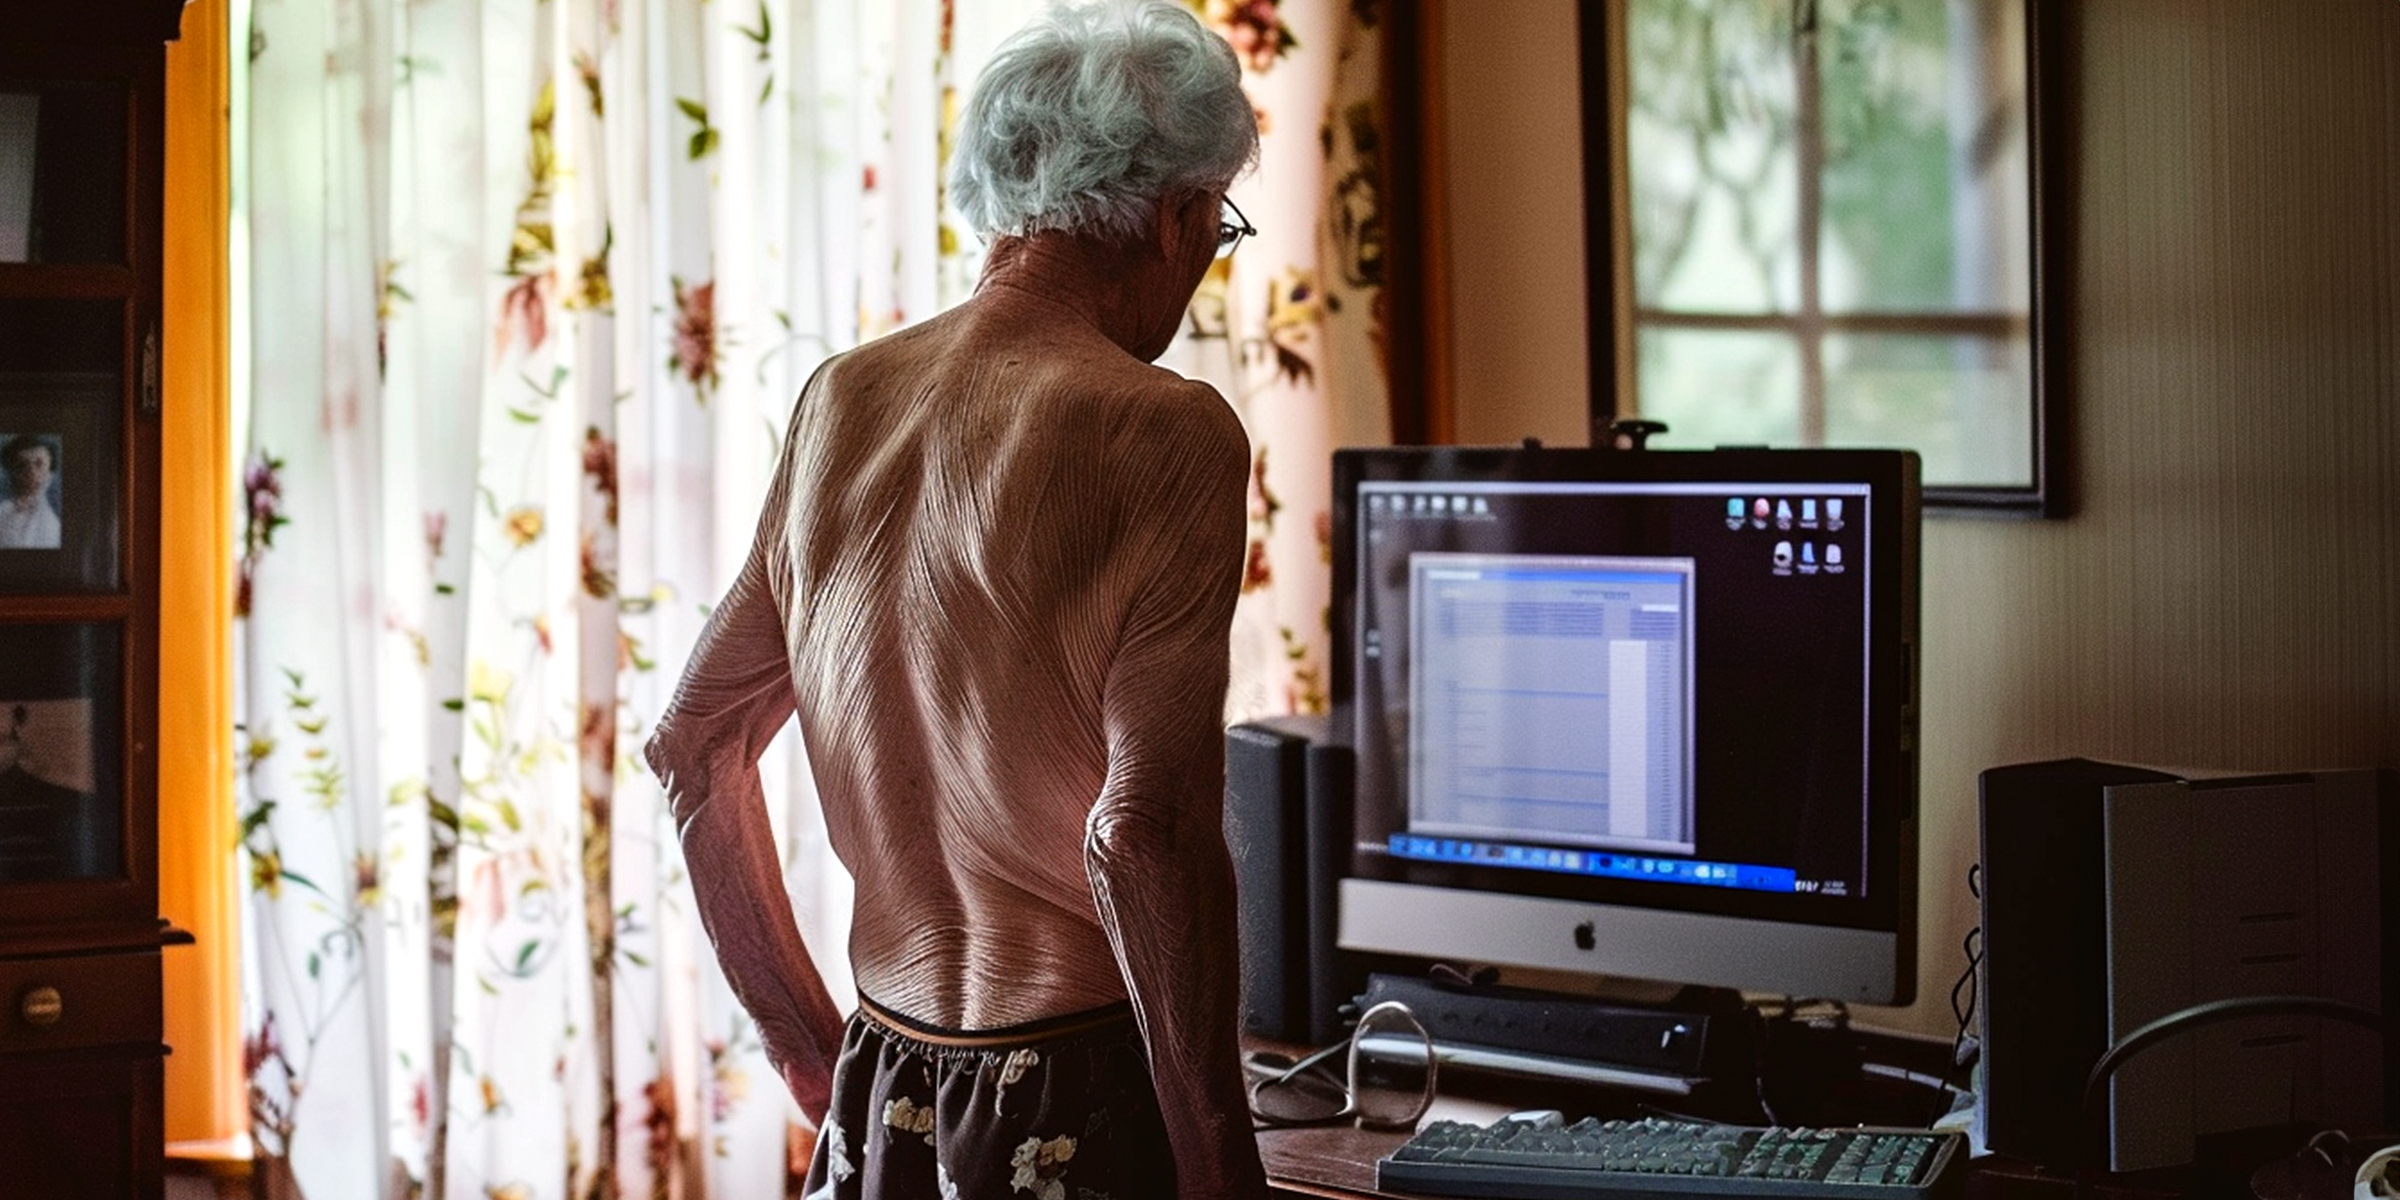 A shirtless older man standing in front of a computer | Source: Midjourney